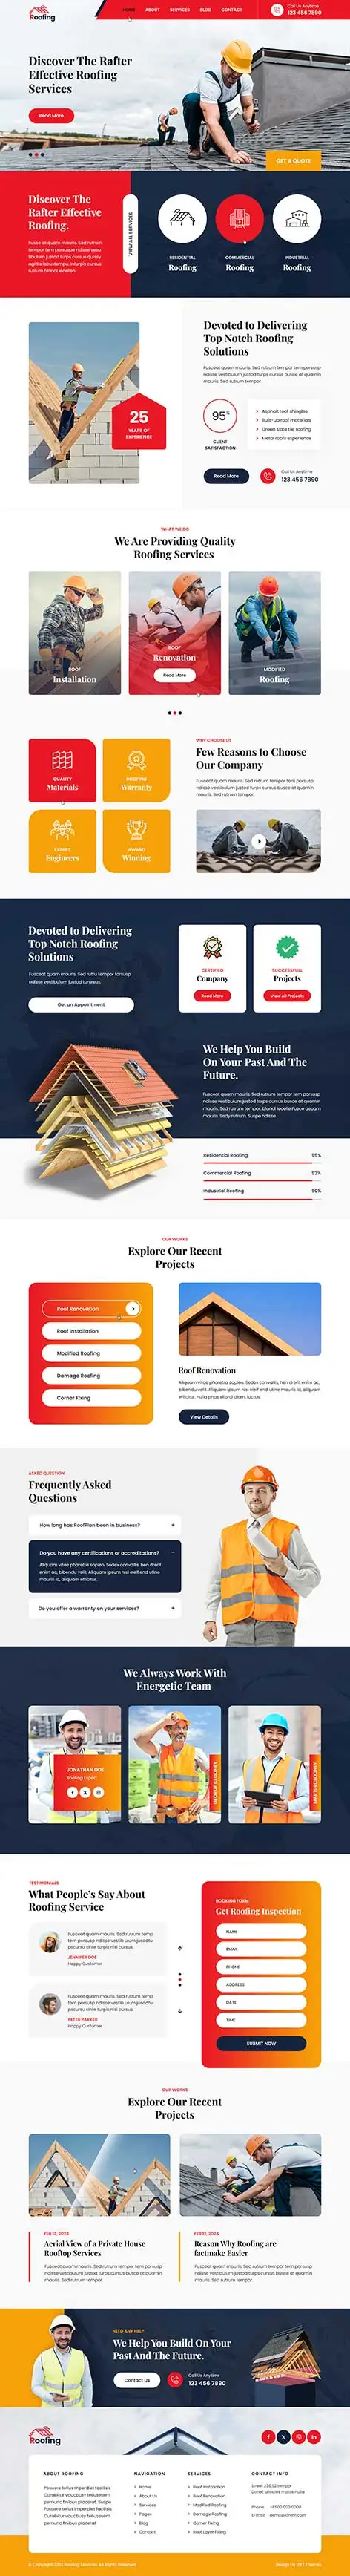 SKT Roofing - Roofing Services WordPress Theme